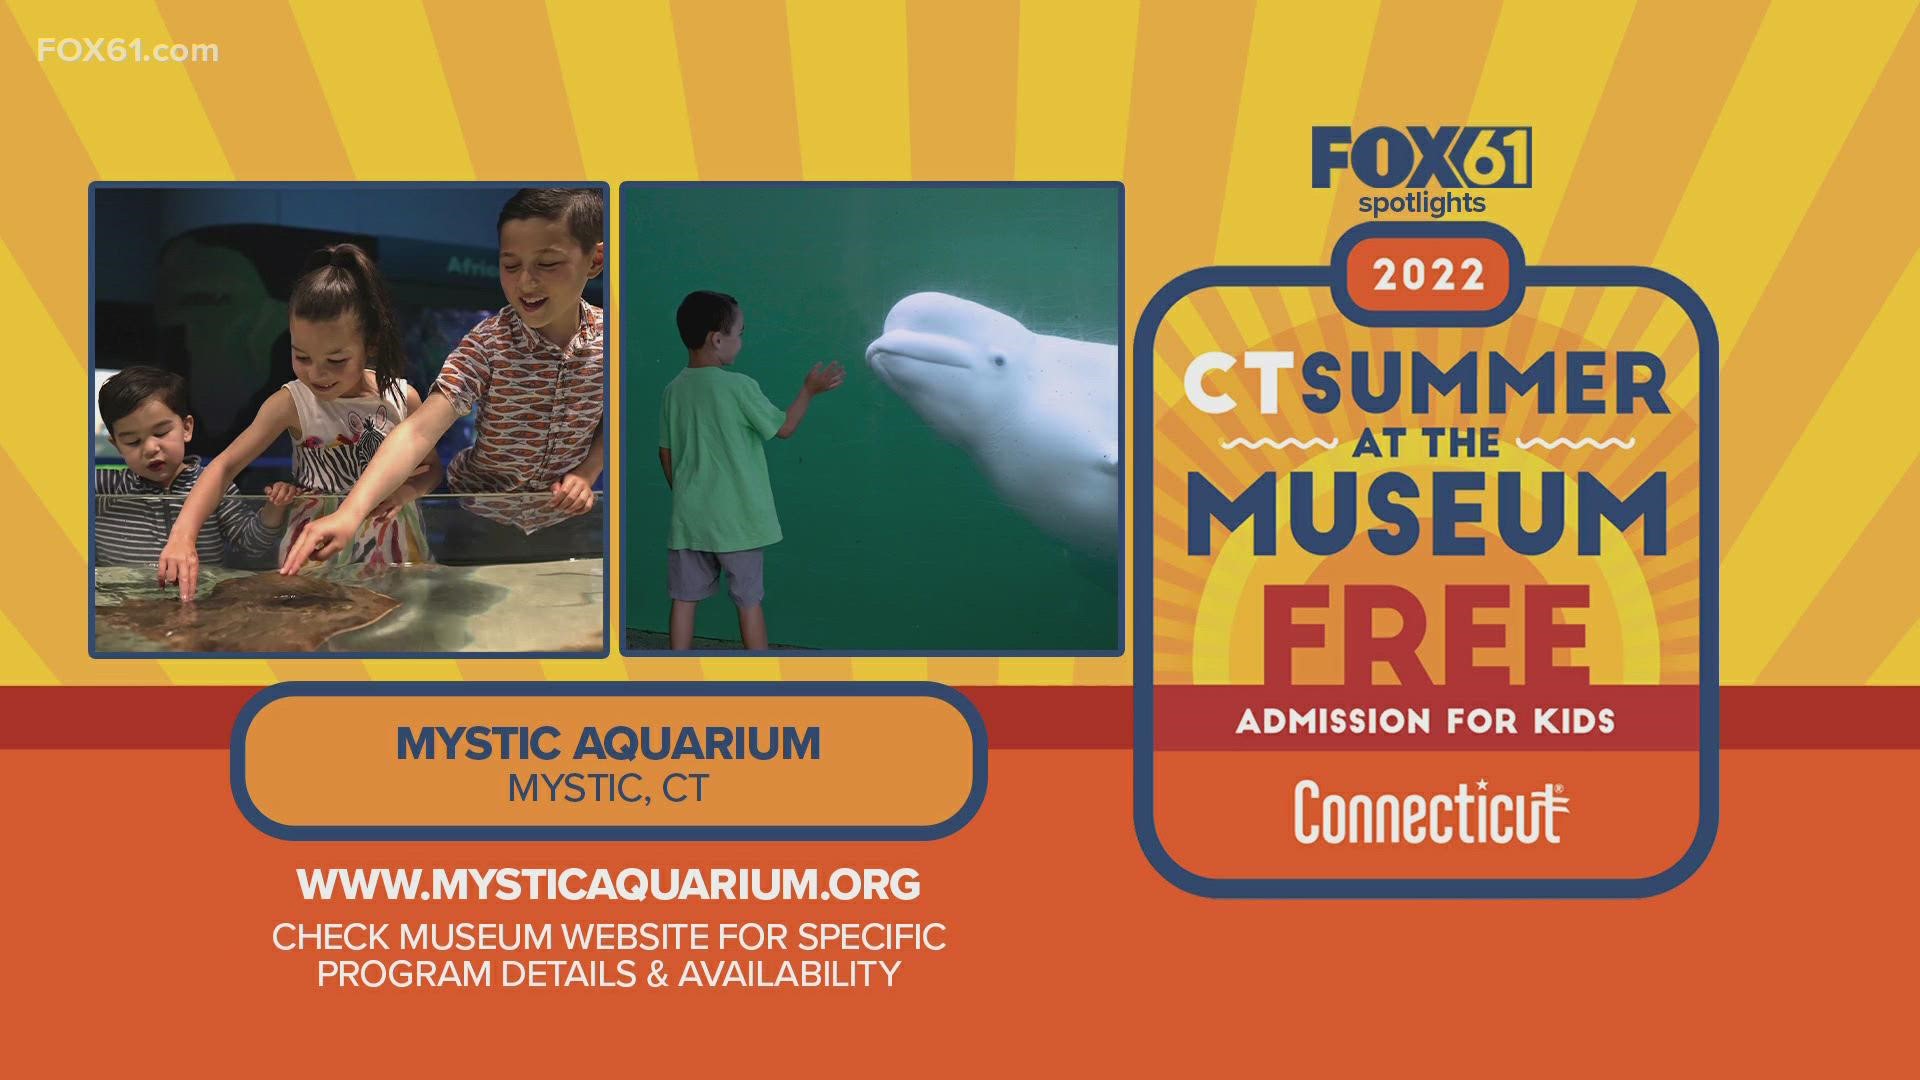 Kids 18 and under can visit Mystic Aquarium for free with an adult who is a resident of Connecticut. It runs through Sept. 5.